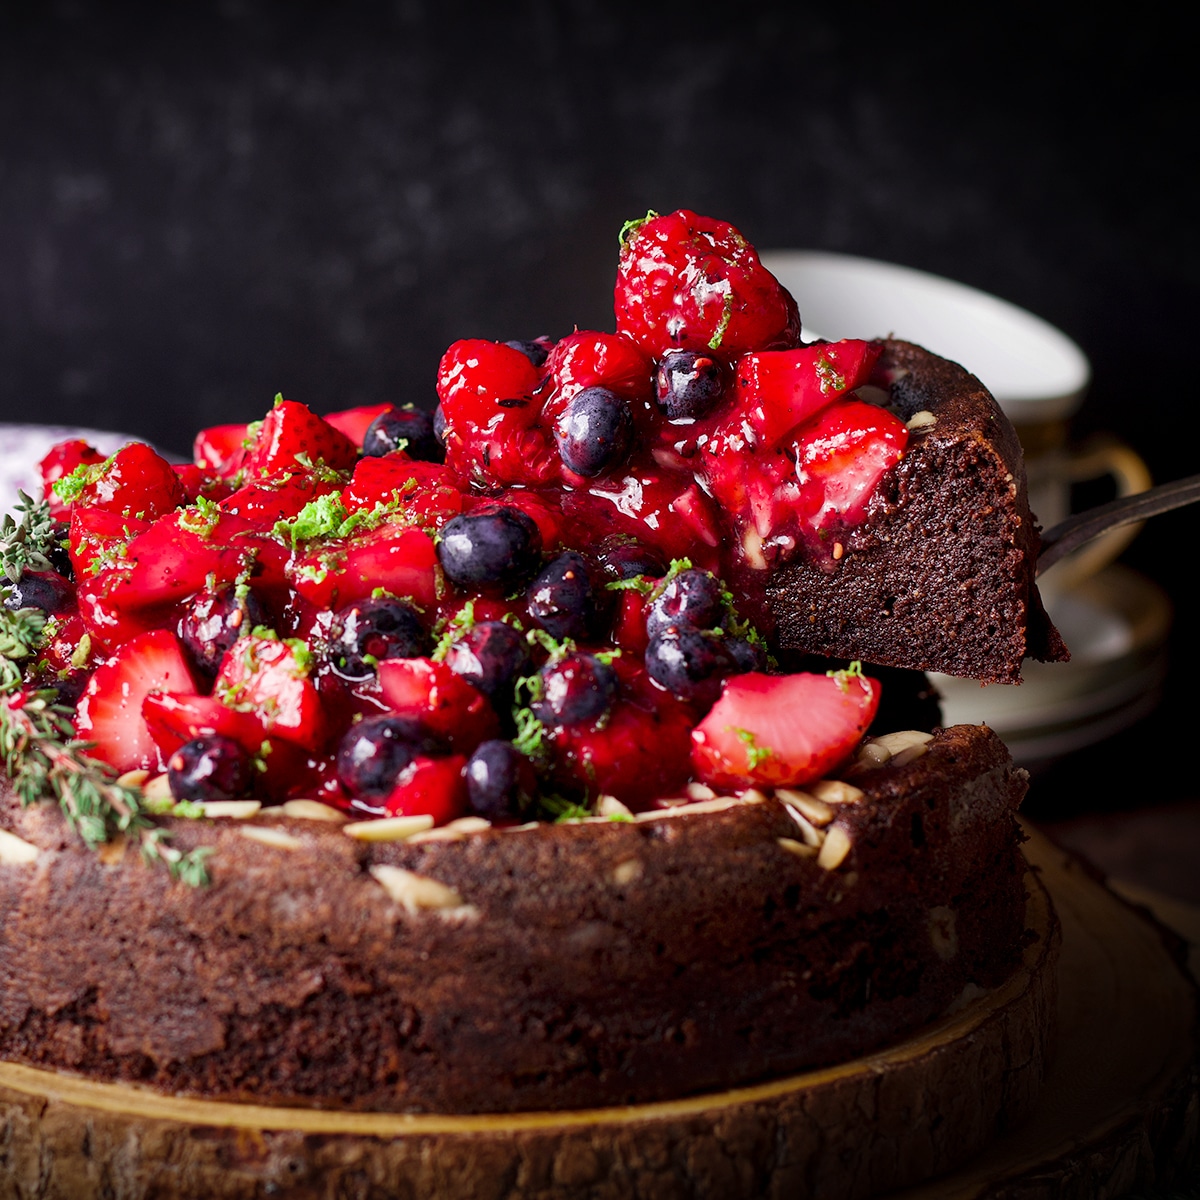 Using a cake server to serve a slice of flourless, gluten-free chocolate ricotta cake covered in fresh berry sauce.